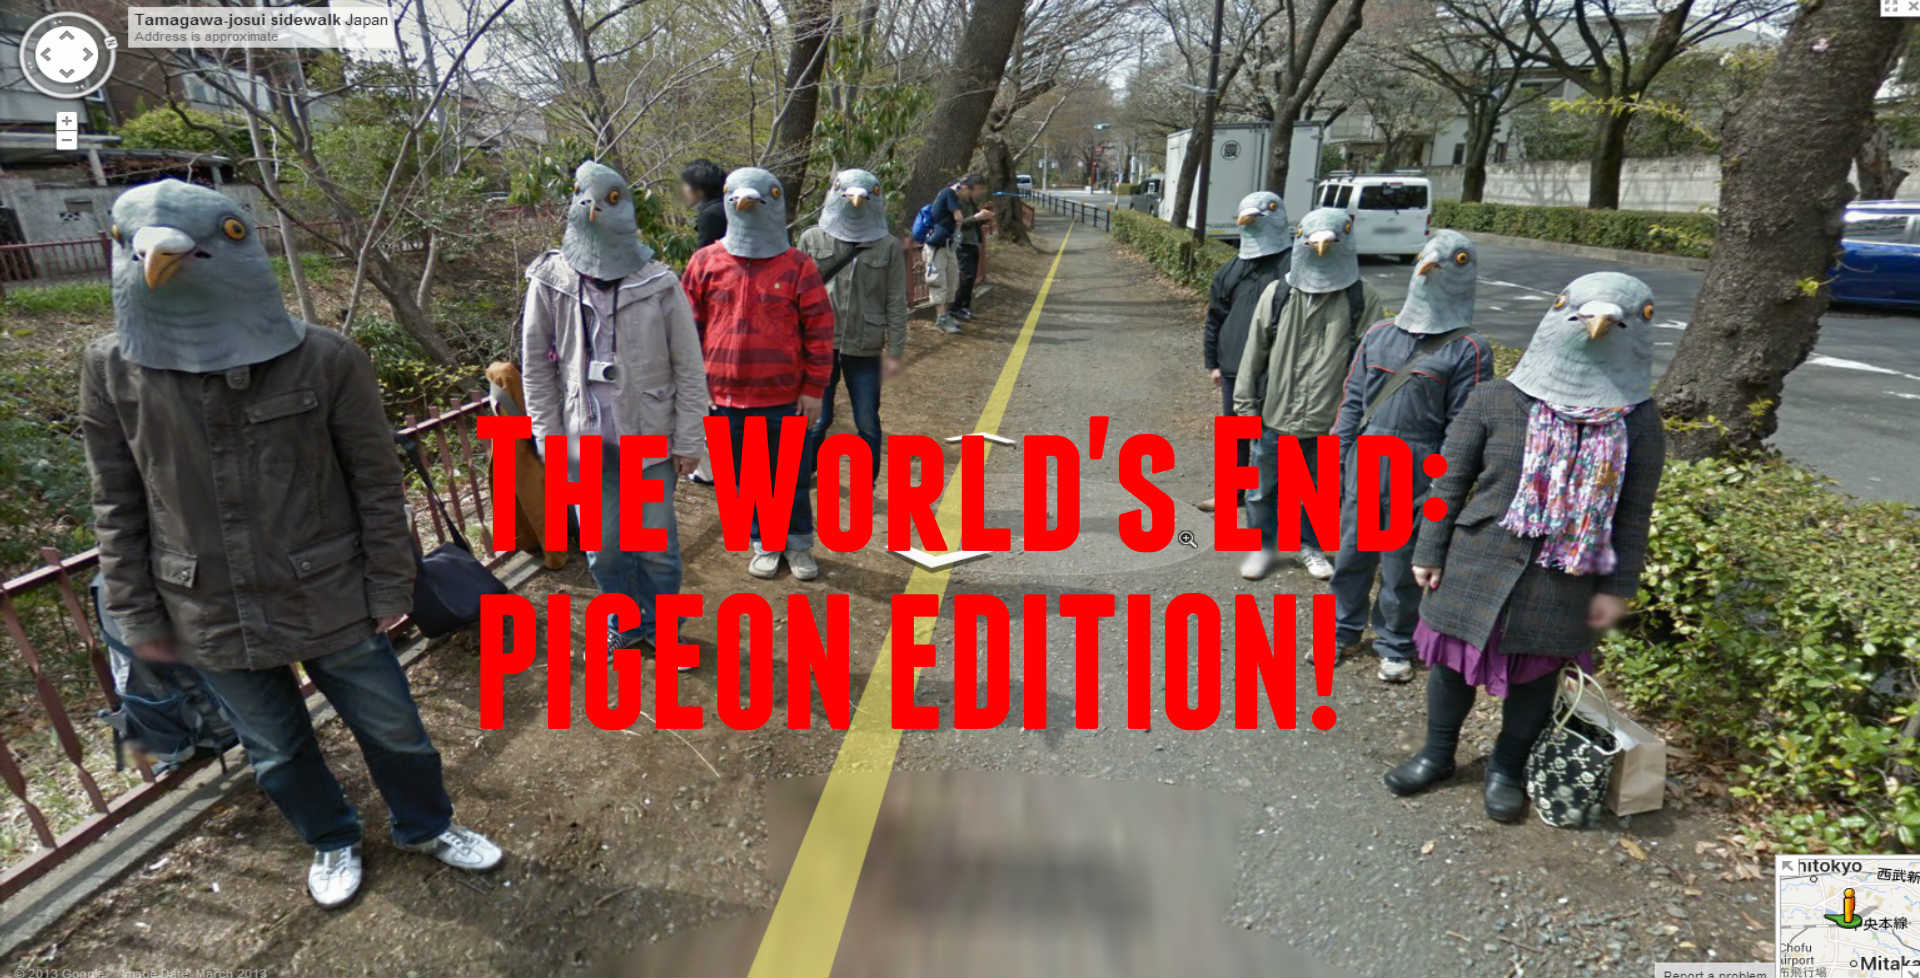 The World's End: Pigeon Edition